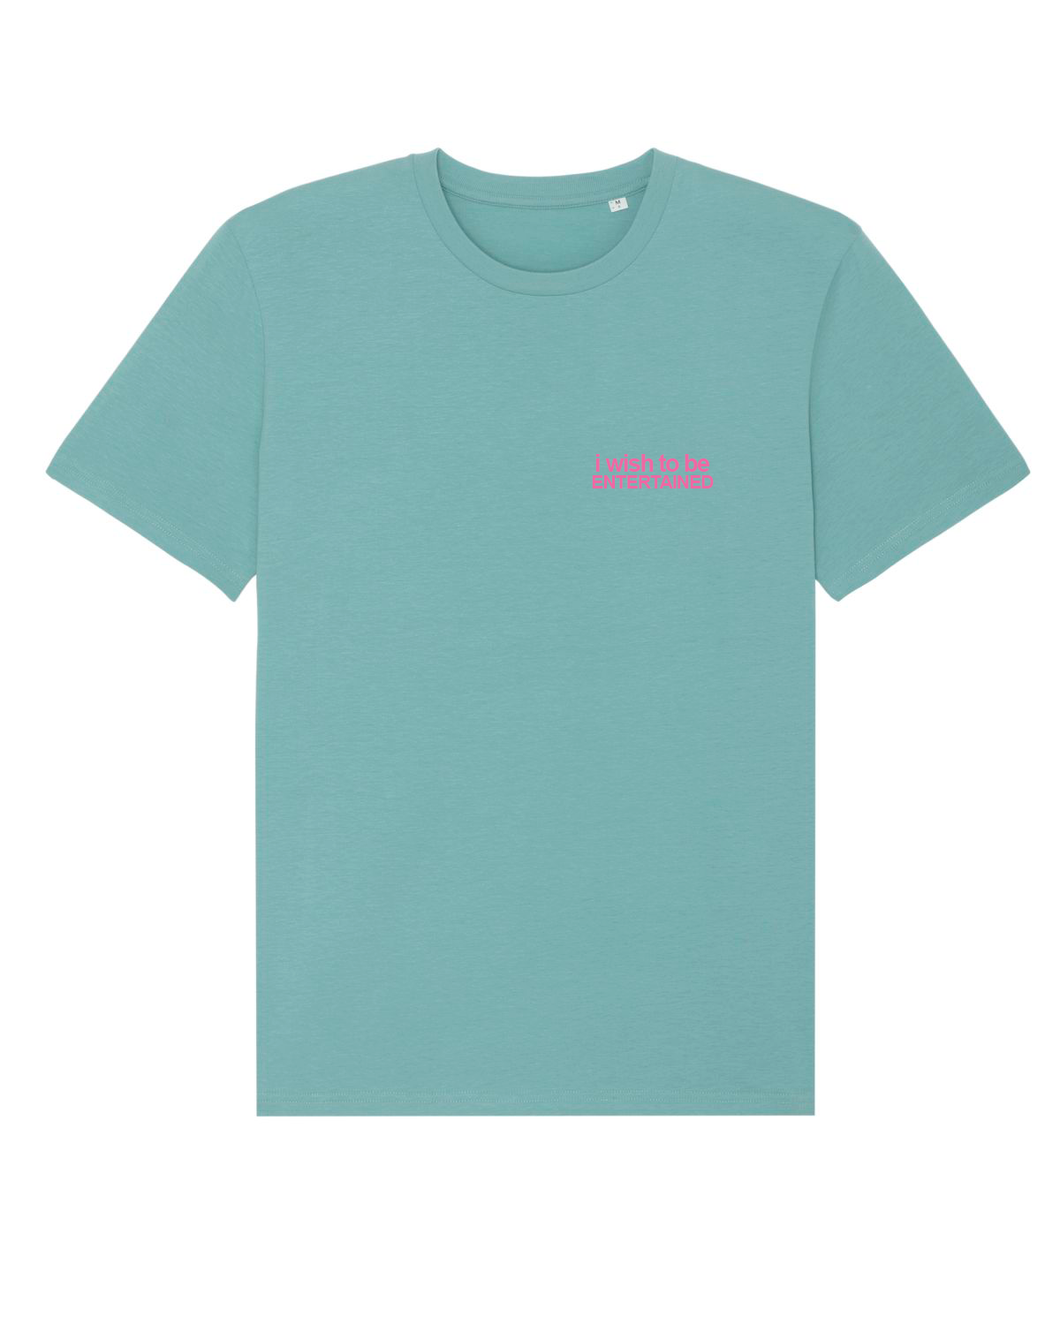 Entertained - T-Shirt - Teal